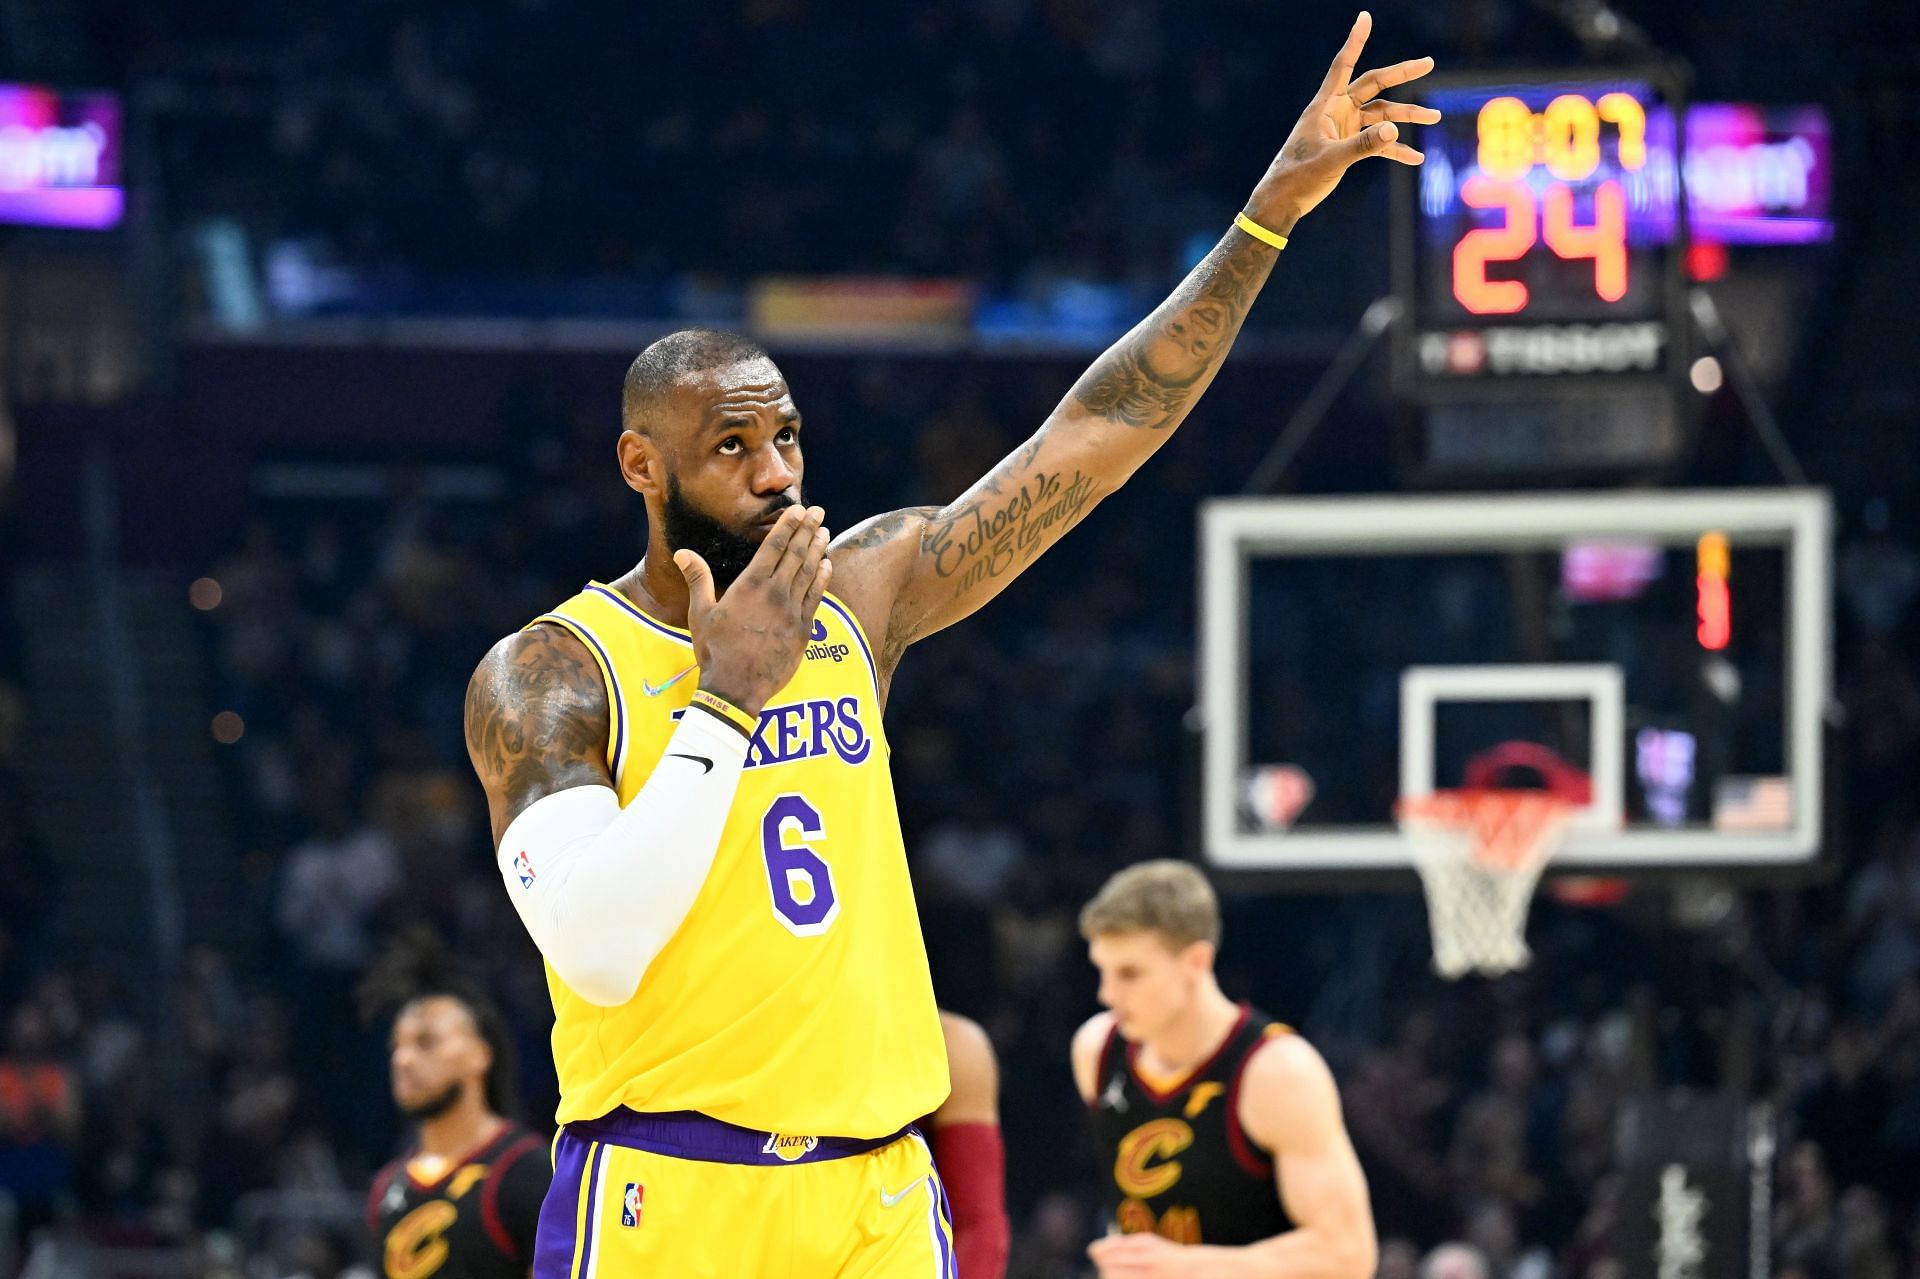 LeBron James is the number one, according to Colin Cowherd. [Image Credit: Getty Images]